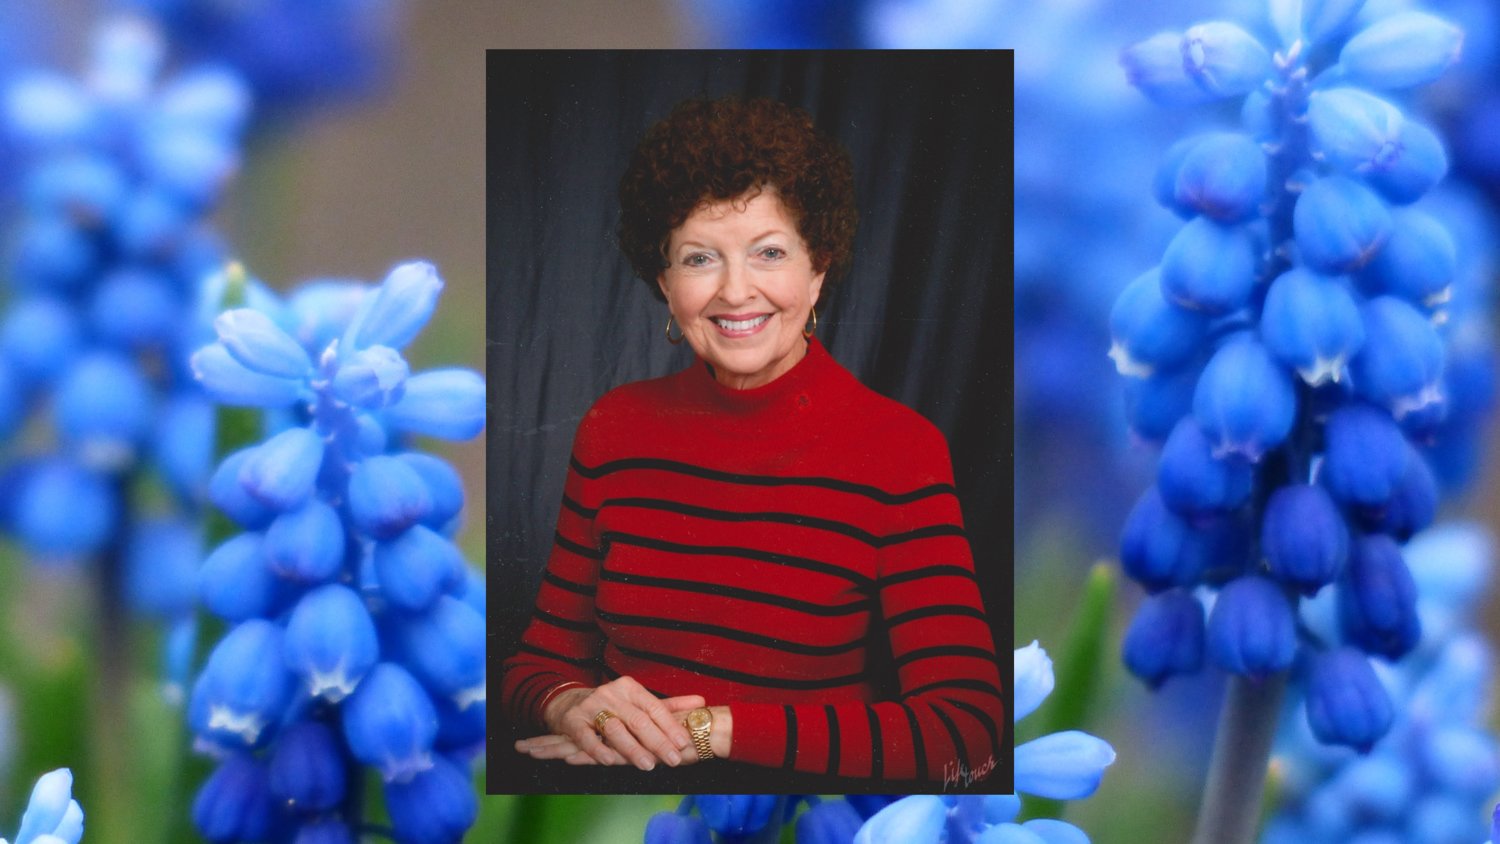 Joan Elizabeth Woods Watson passed Jan. 25 at the age of 75. She was a loving mom, grandma, nurse, rice farmer, cattle rancher and pilot. She was a lover of her family and animals and is truly missed by those that knew her.